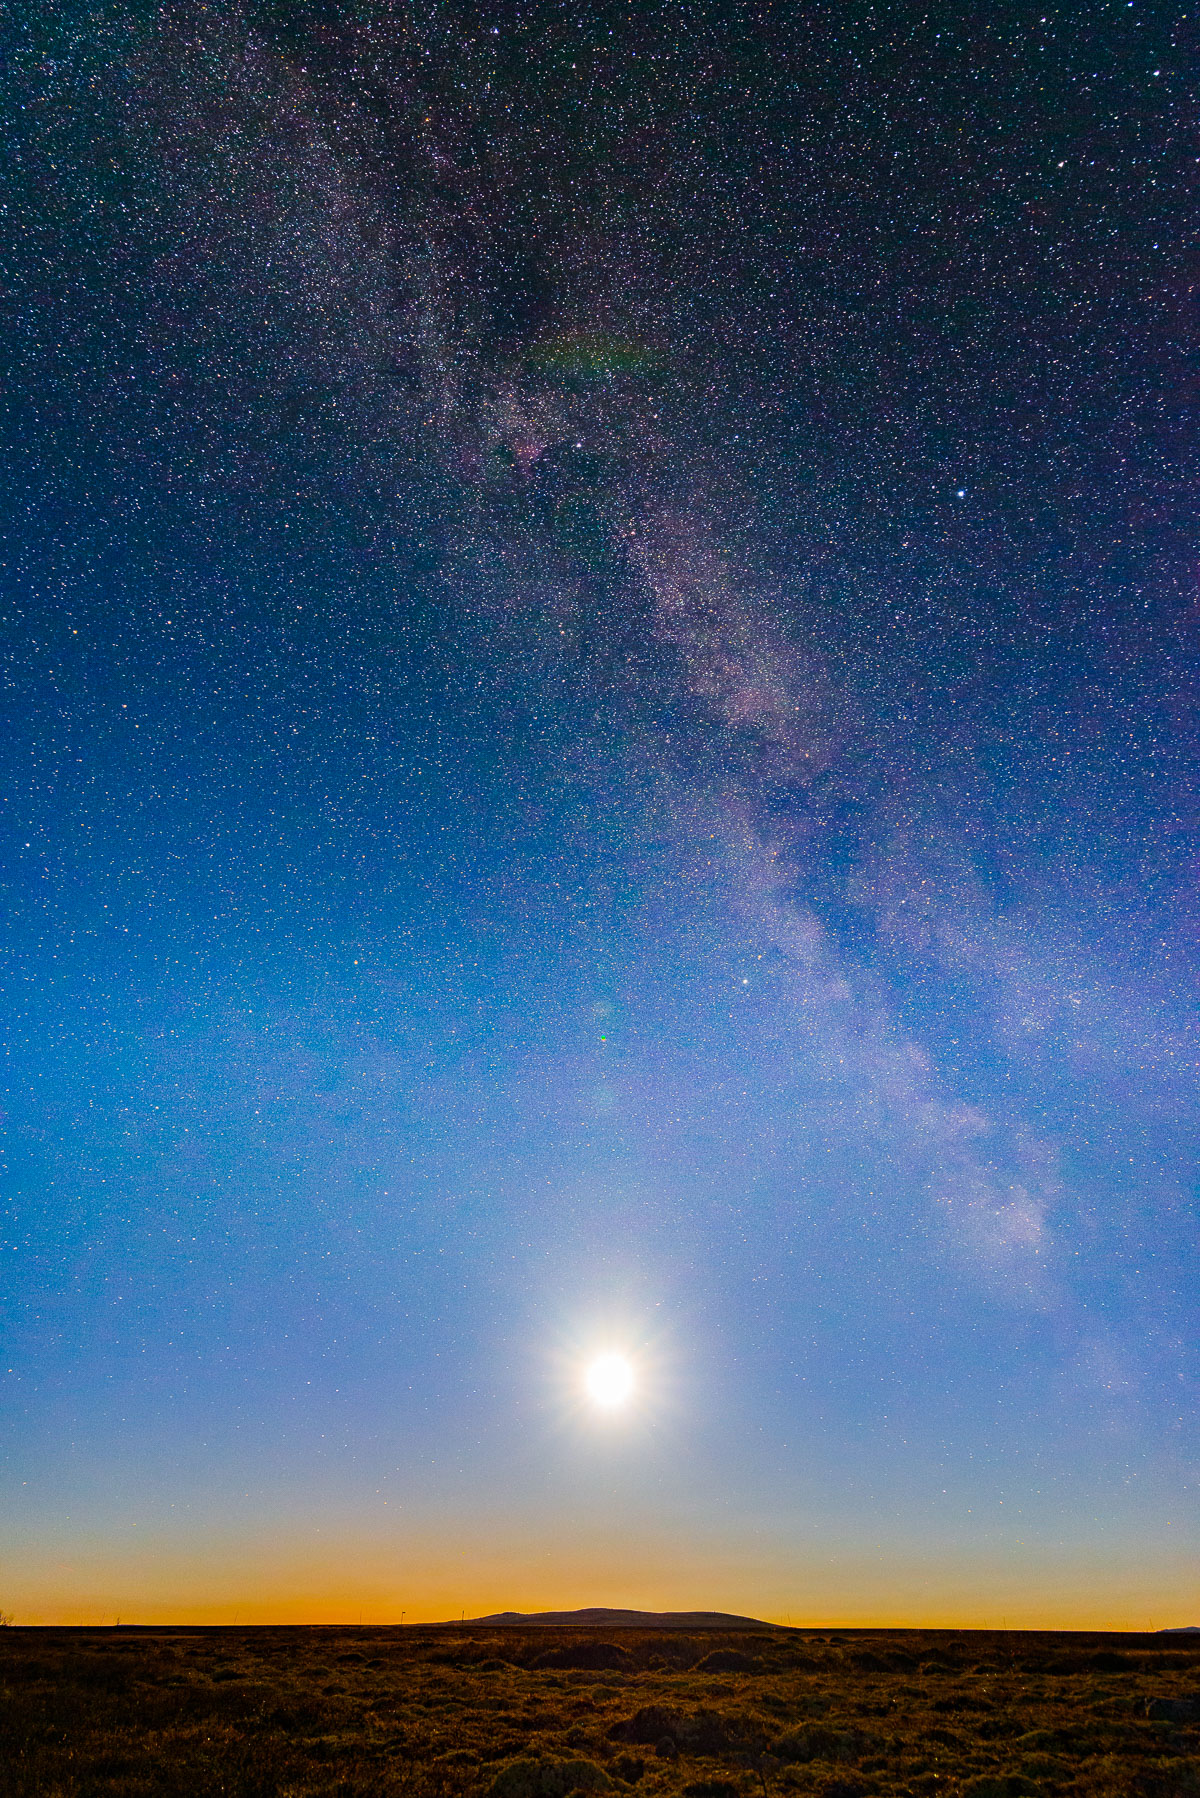 The Moon and the Milky way